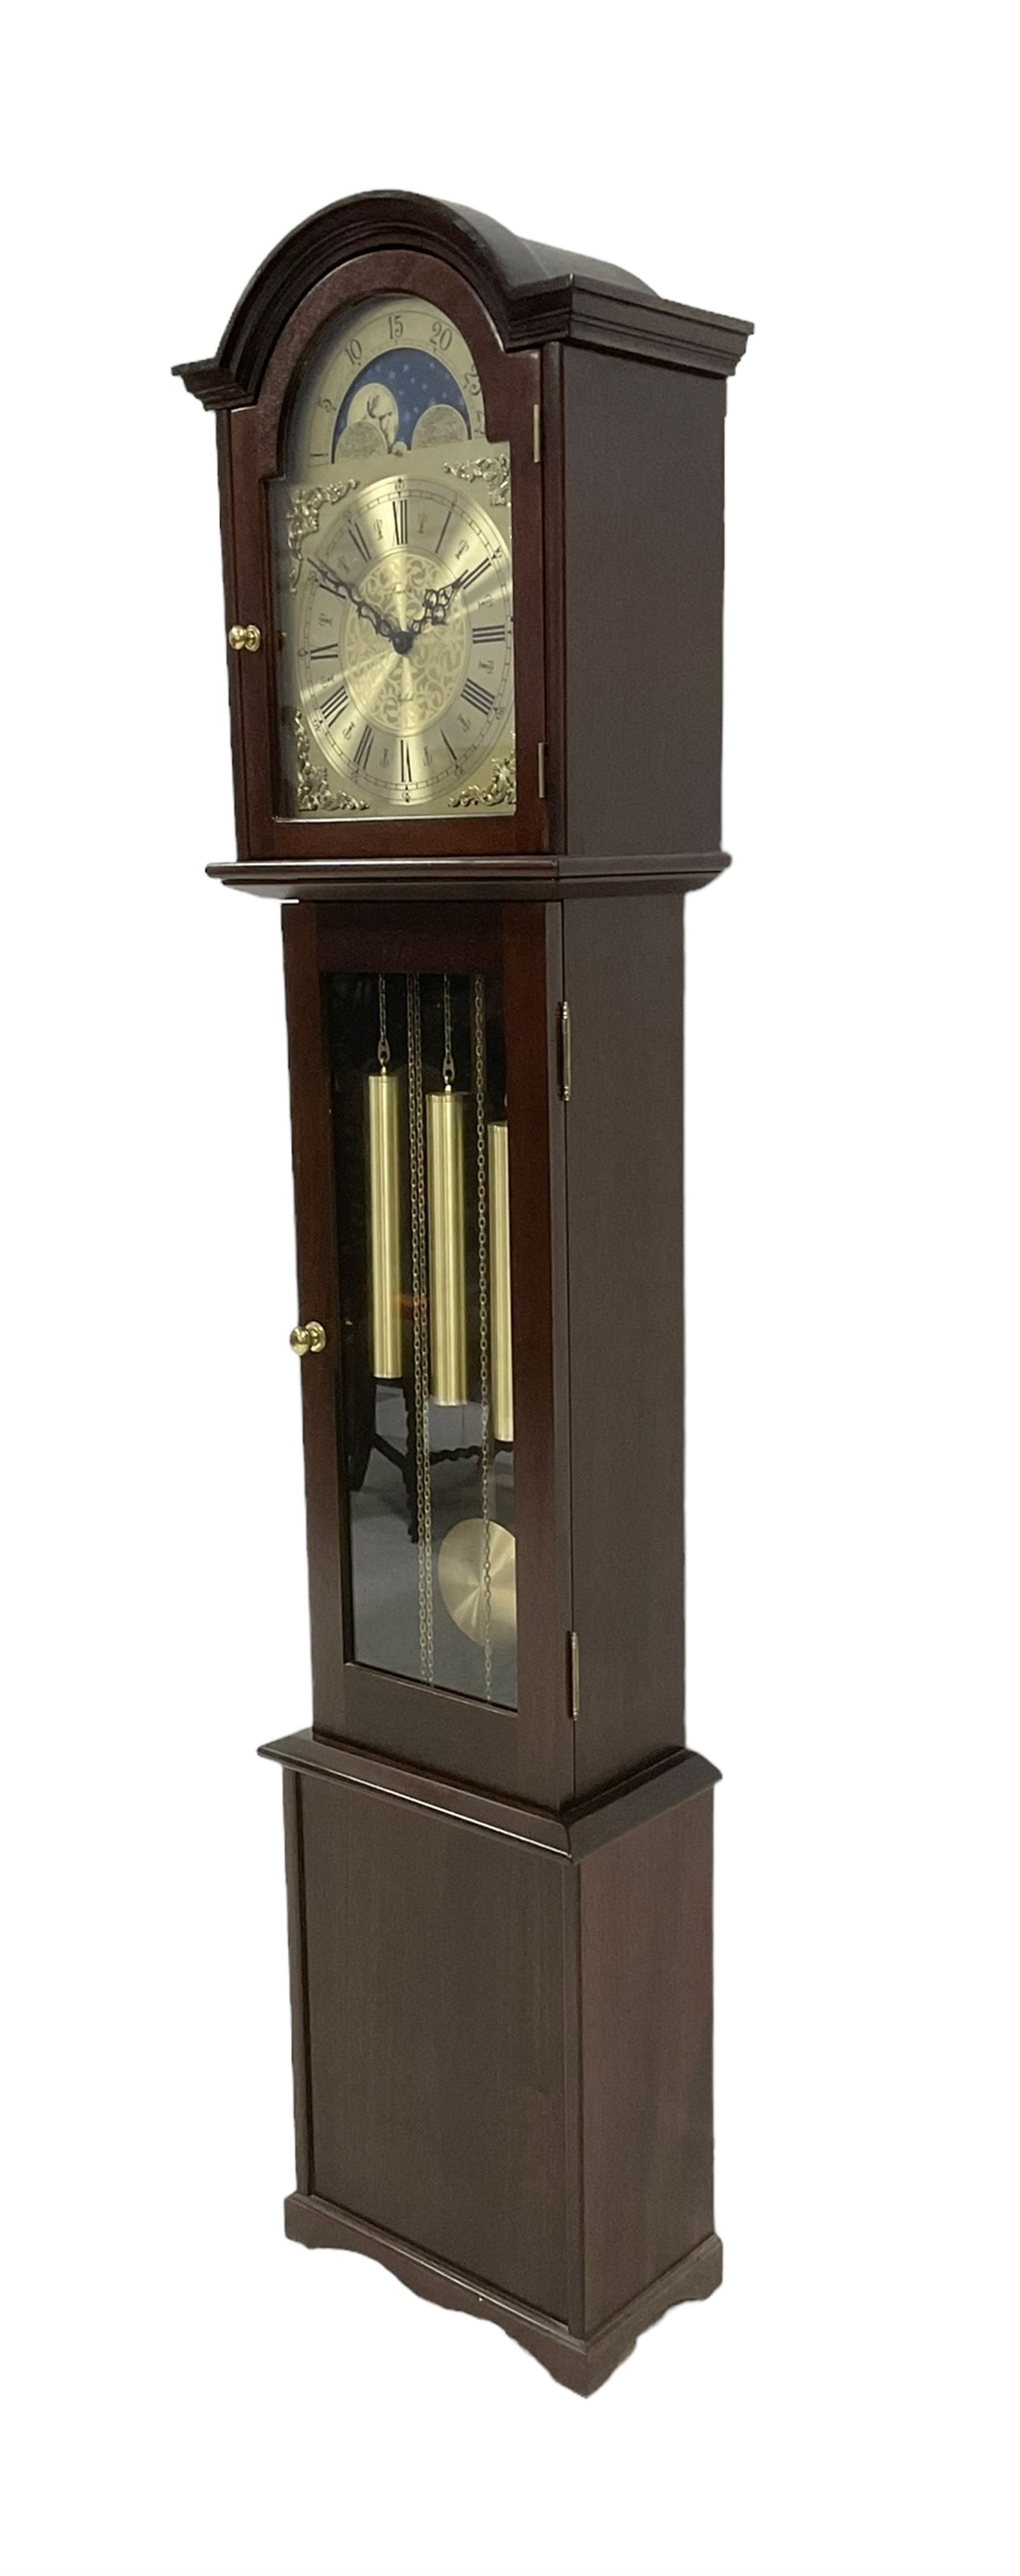 20th century - weight driven 8-day mahogany grandmother clock with a swans neck pediment and fully g - Image 2 of 6